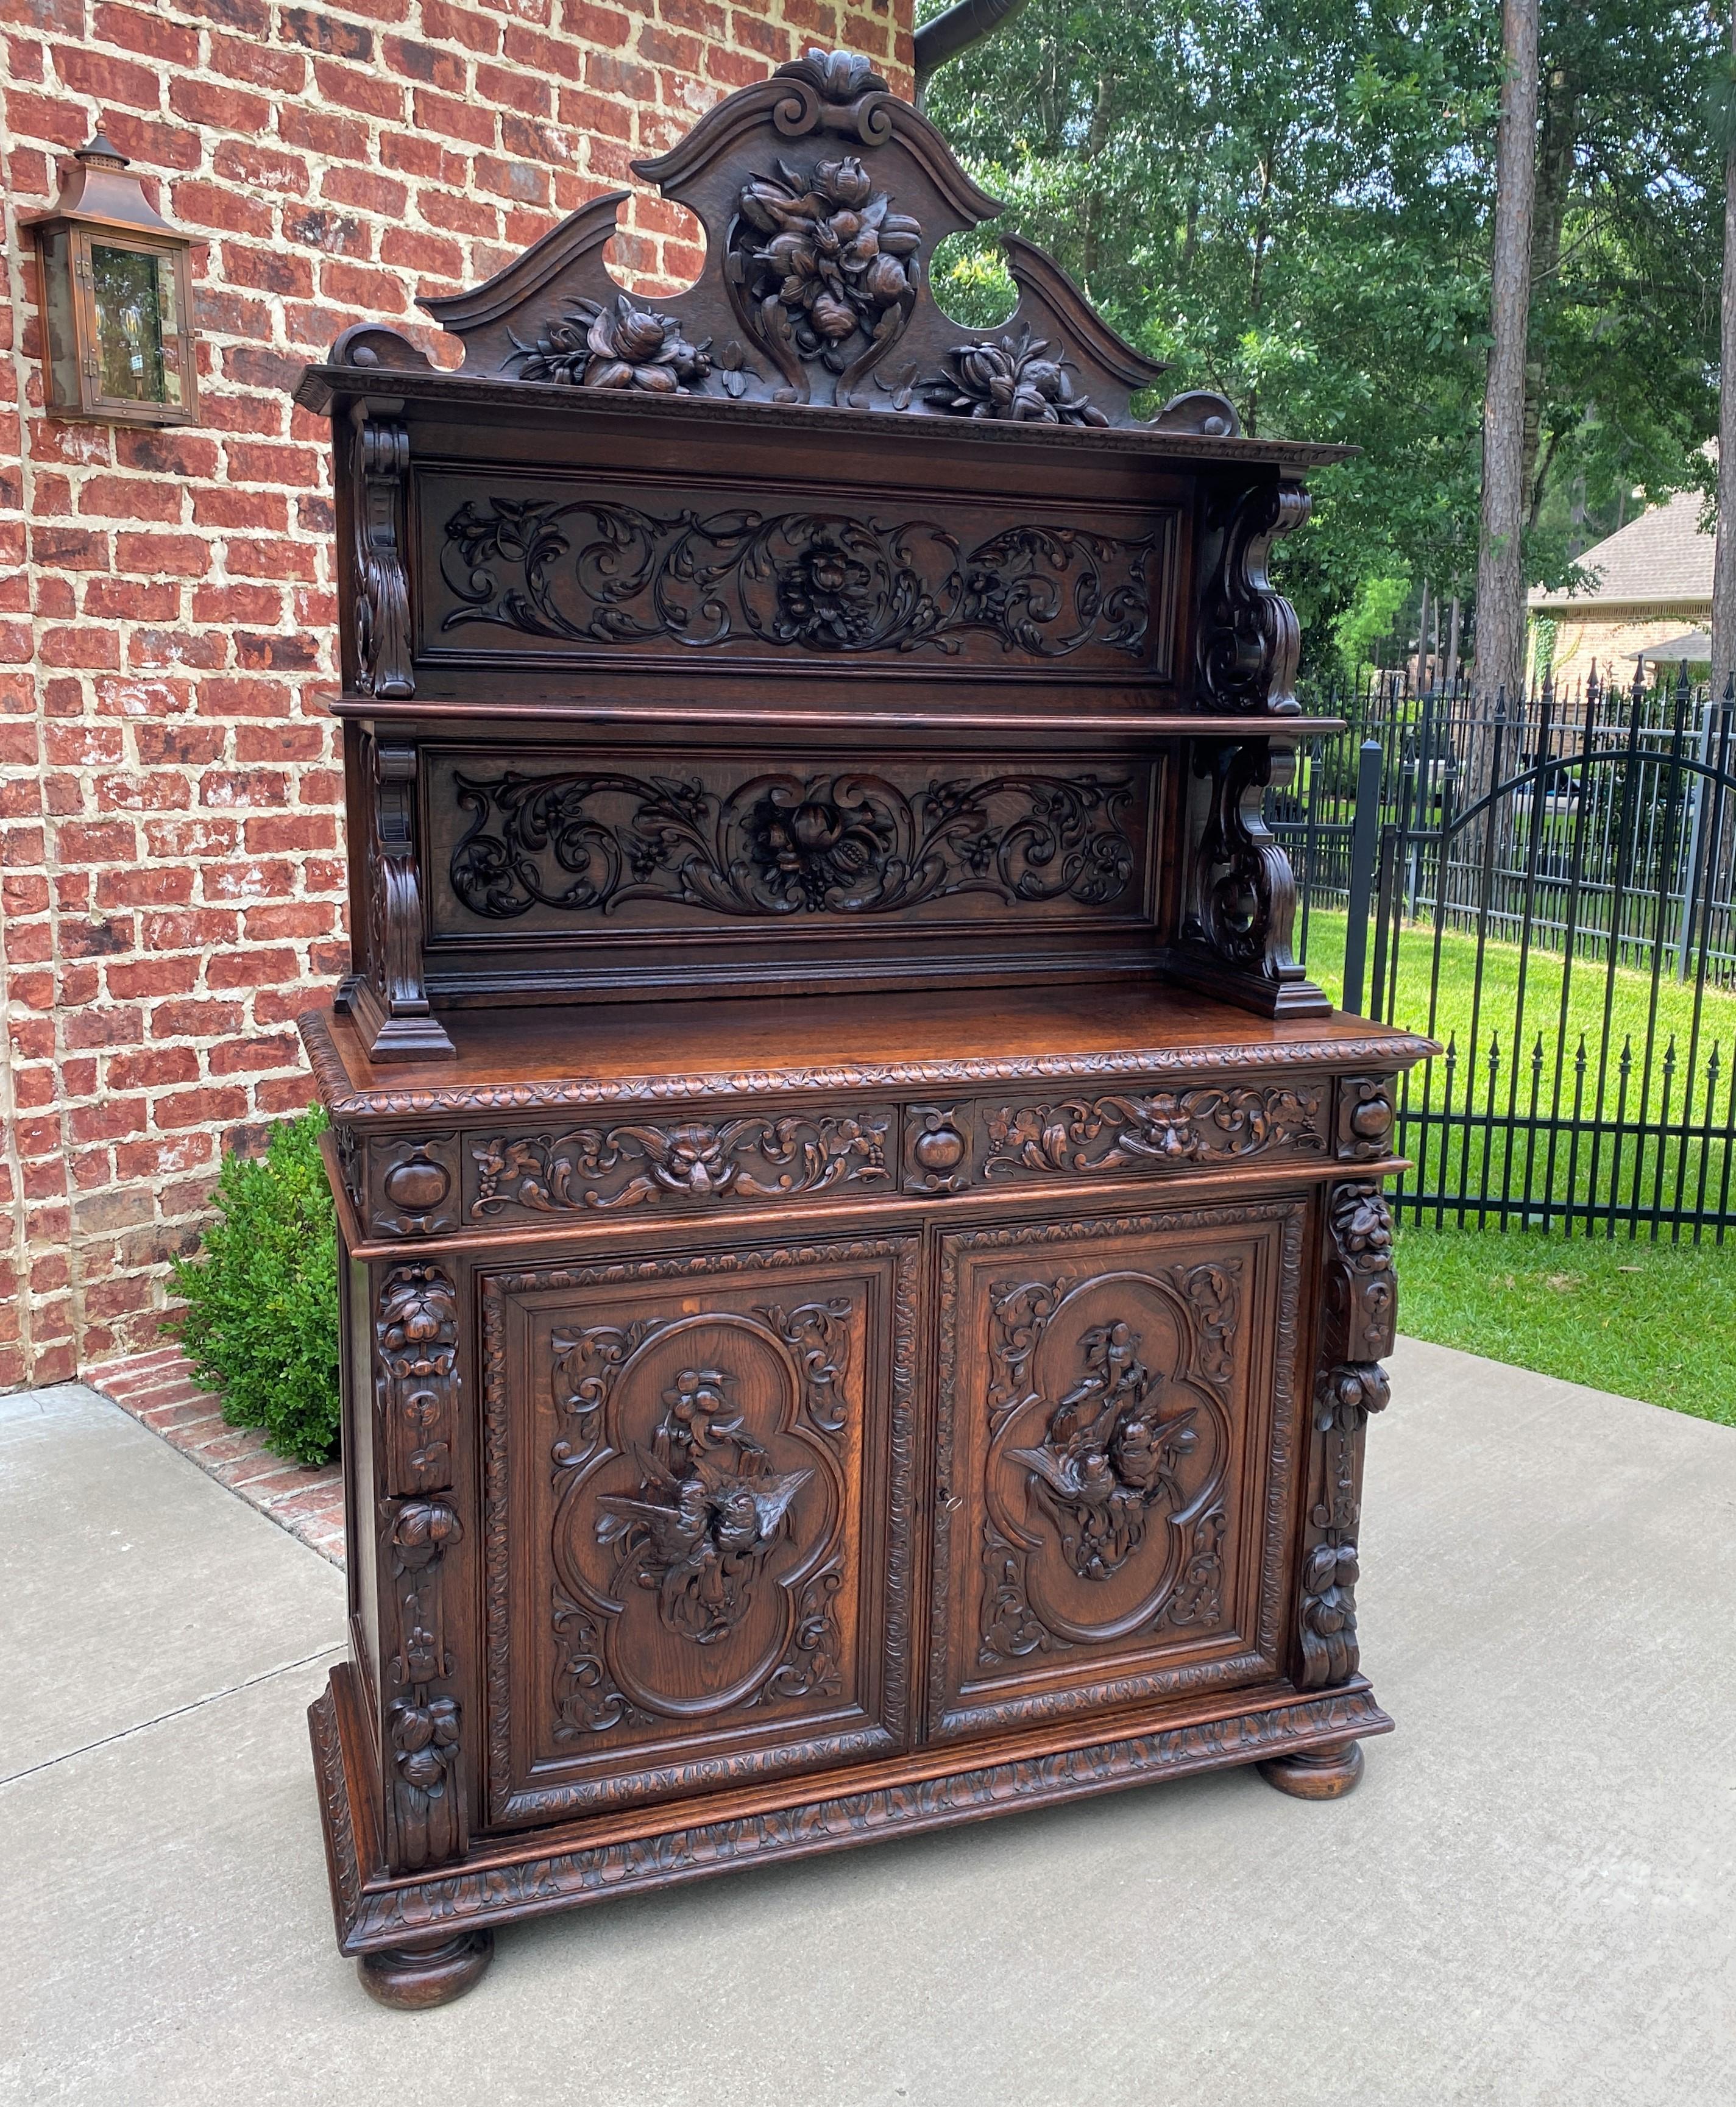 SUPERB 19th Century Antique French Oak 3-Tier Black Forest Server Sideboard Buffet Cabinet~~LION MASK and LOVE BIRDS~~
c. 1880s 

This is only one of multiple exquisite pieces recently received from our European shipper~~wonderful hand-carved oak